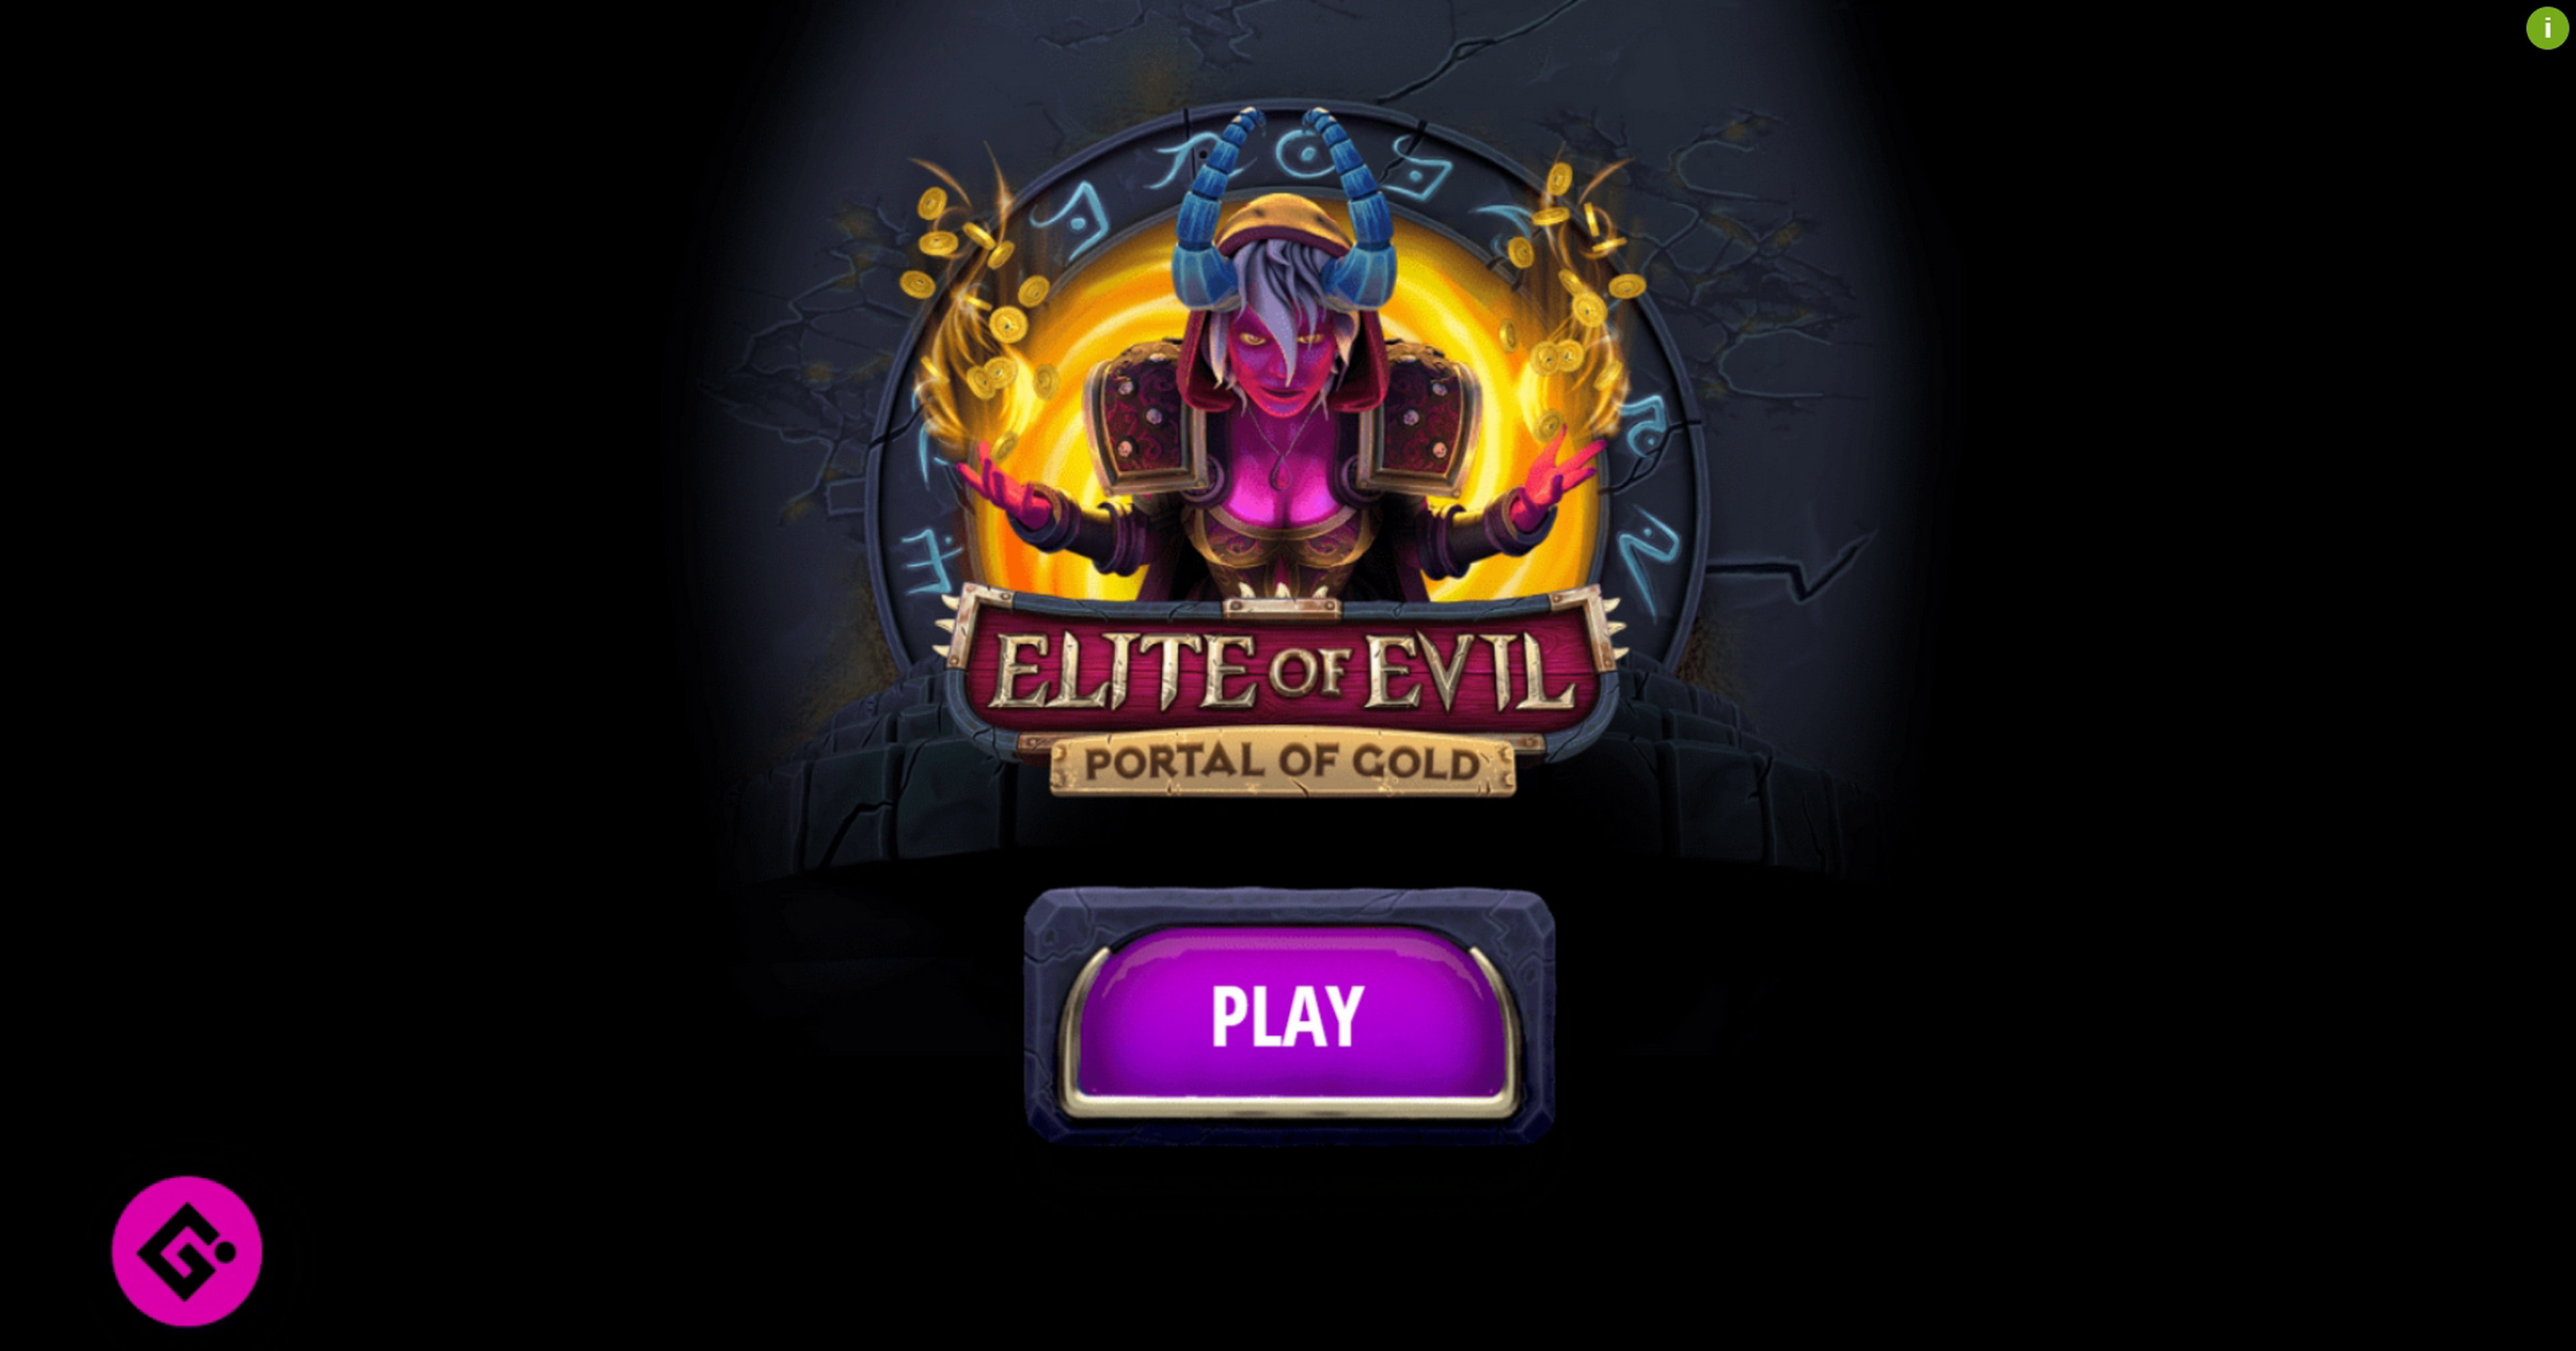 Play Elite of Evil Free Casino Slot Game by Gluck Games